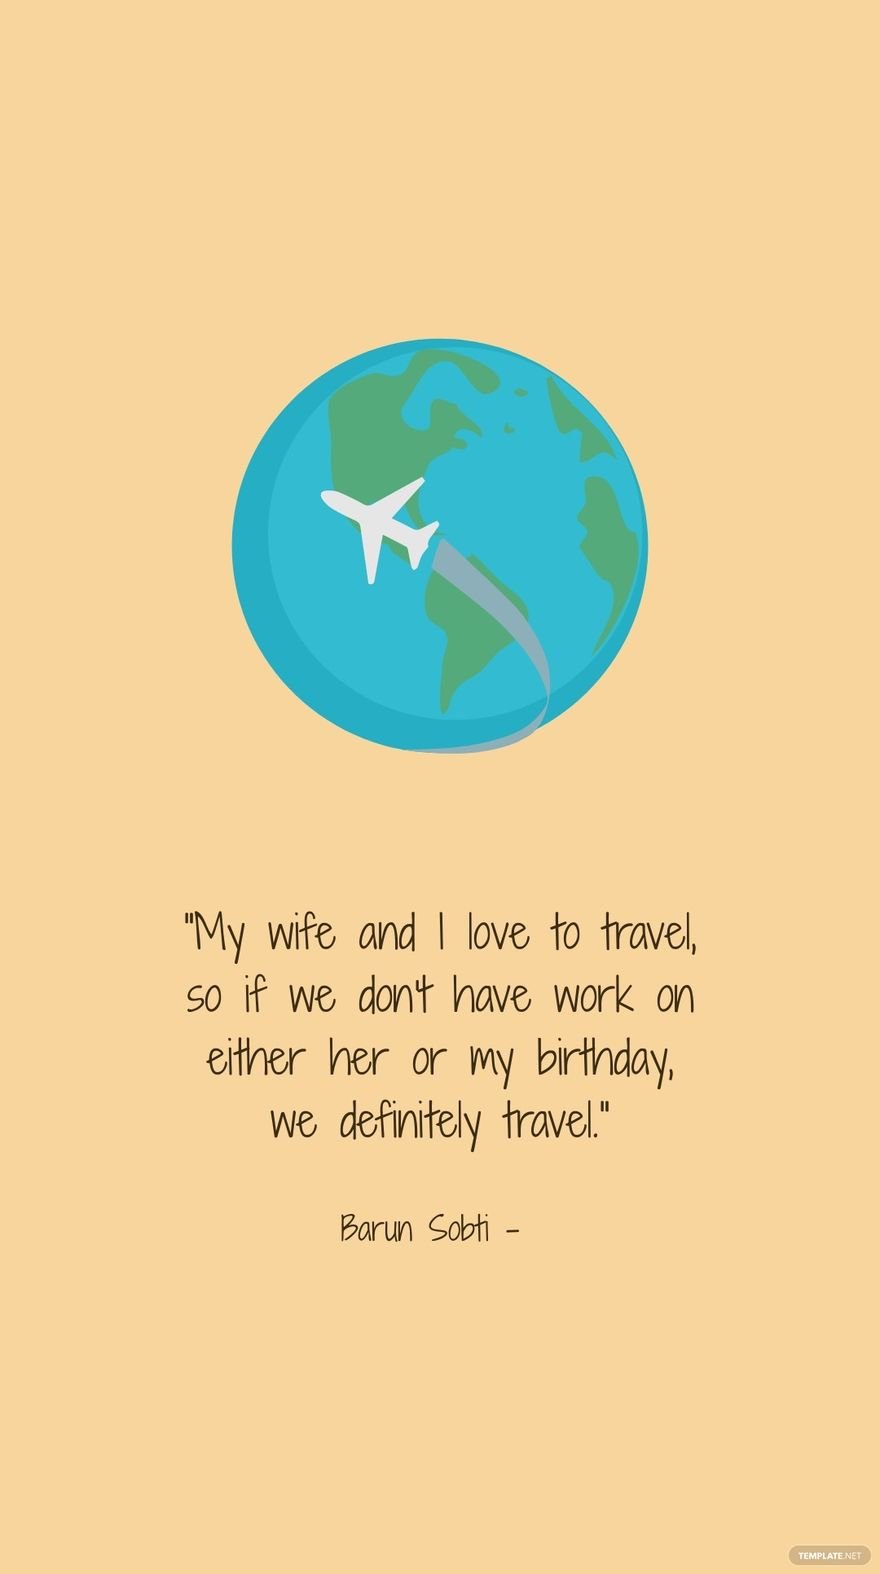 Barun Sobti - My wife and I love to travel, so if we don't have work on either her or my birthday, we definitely travel. in JPG